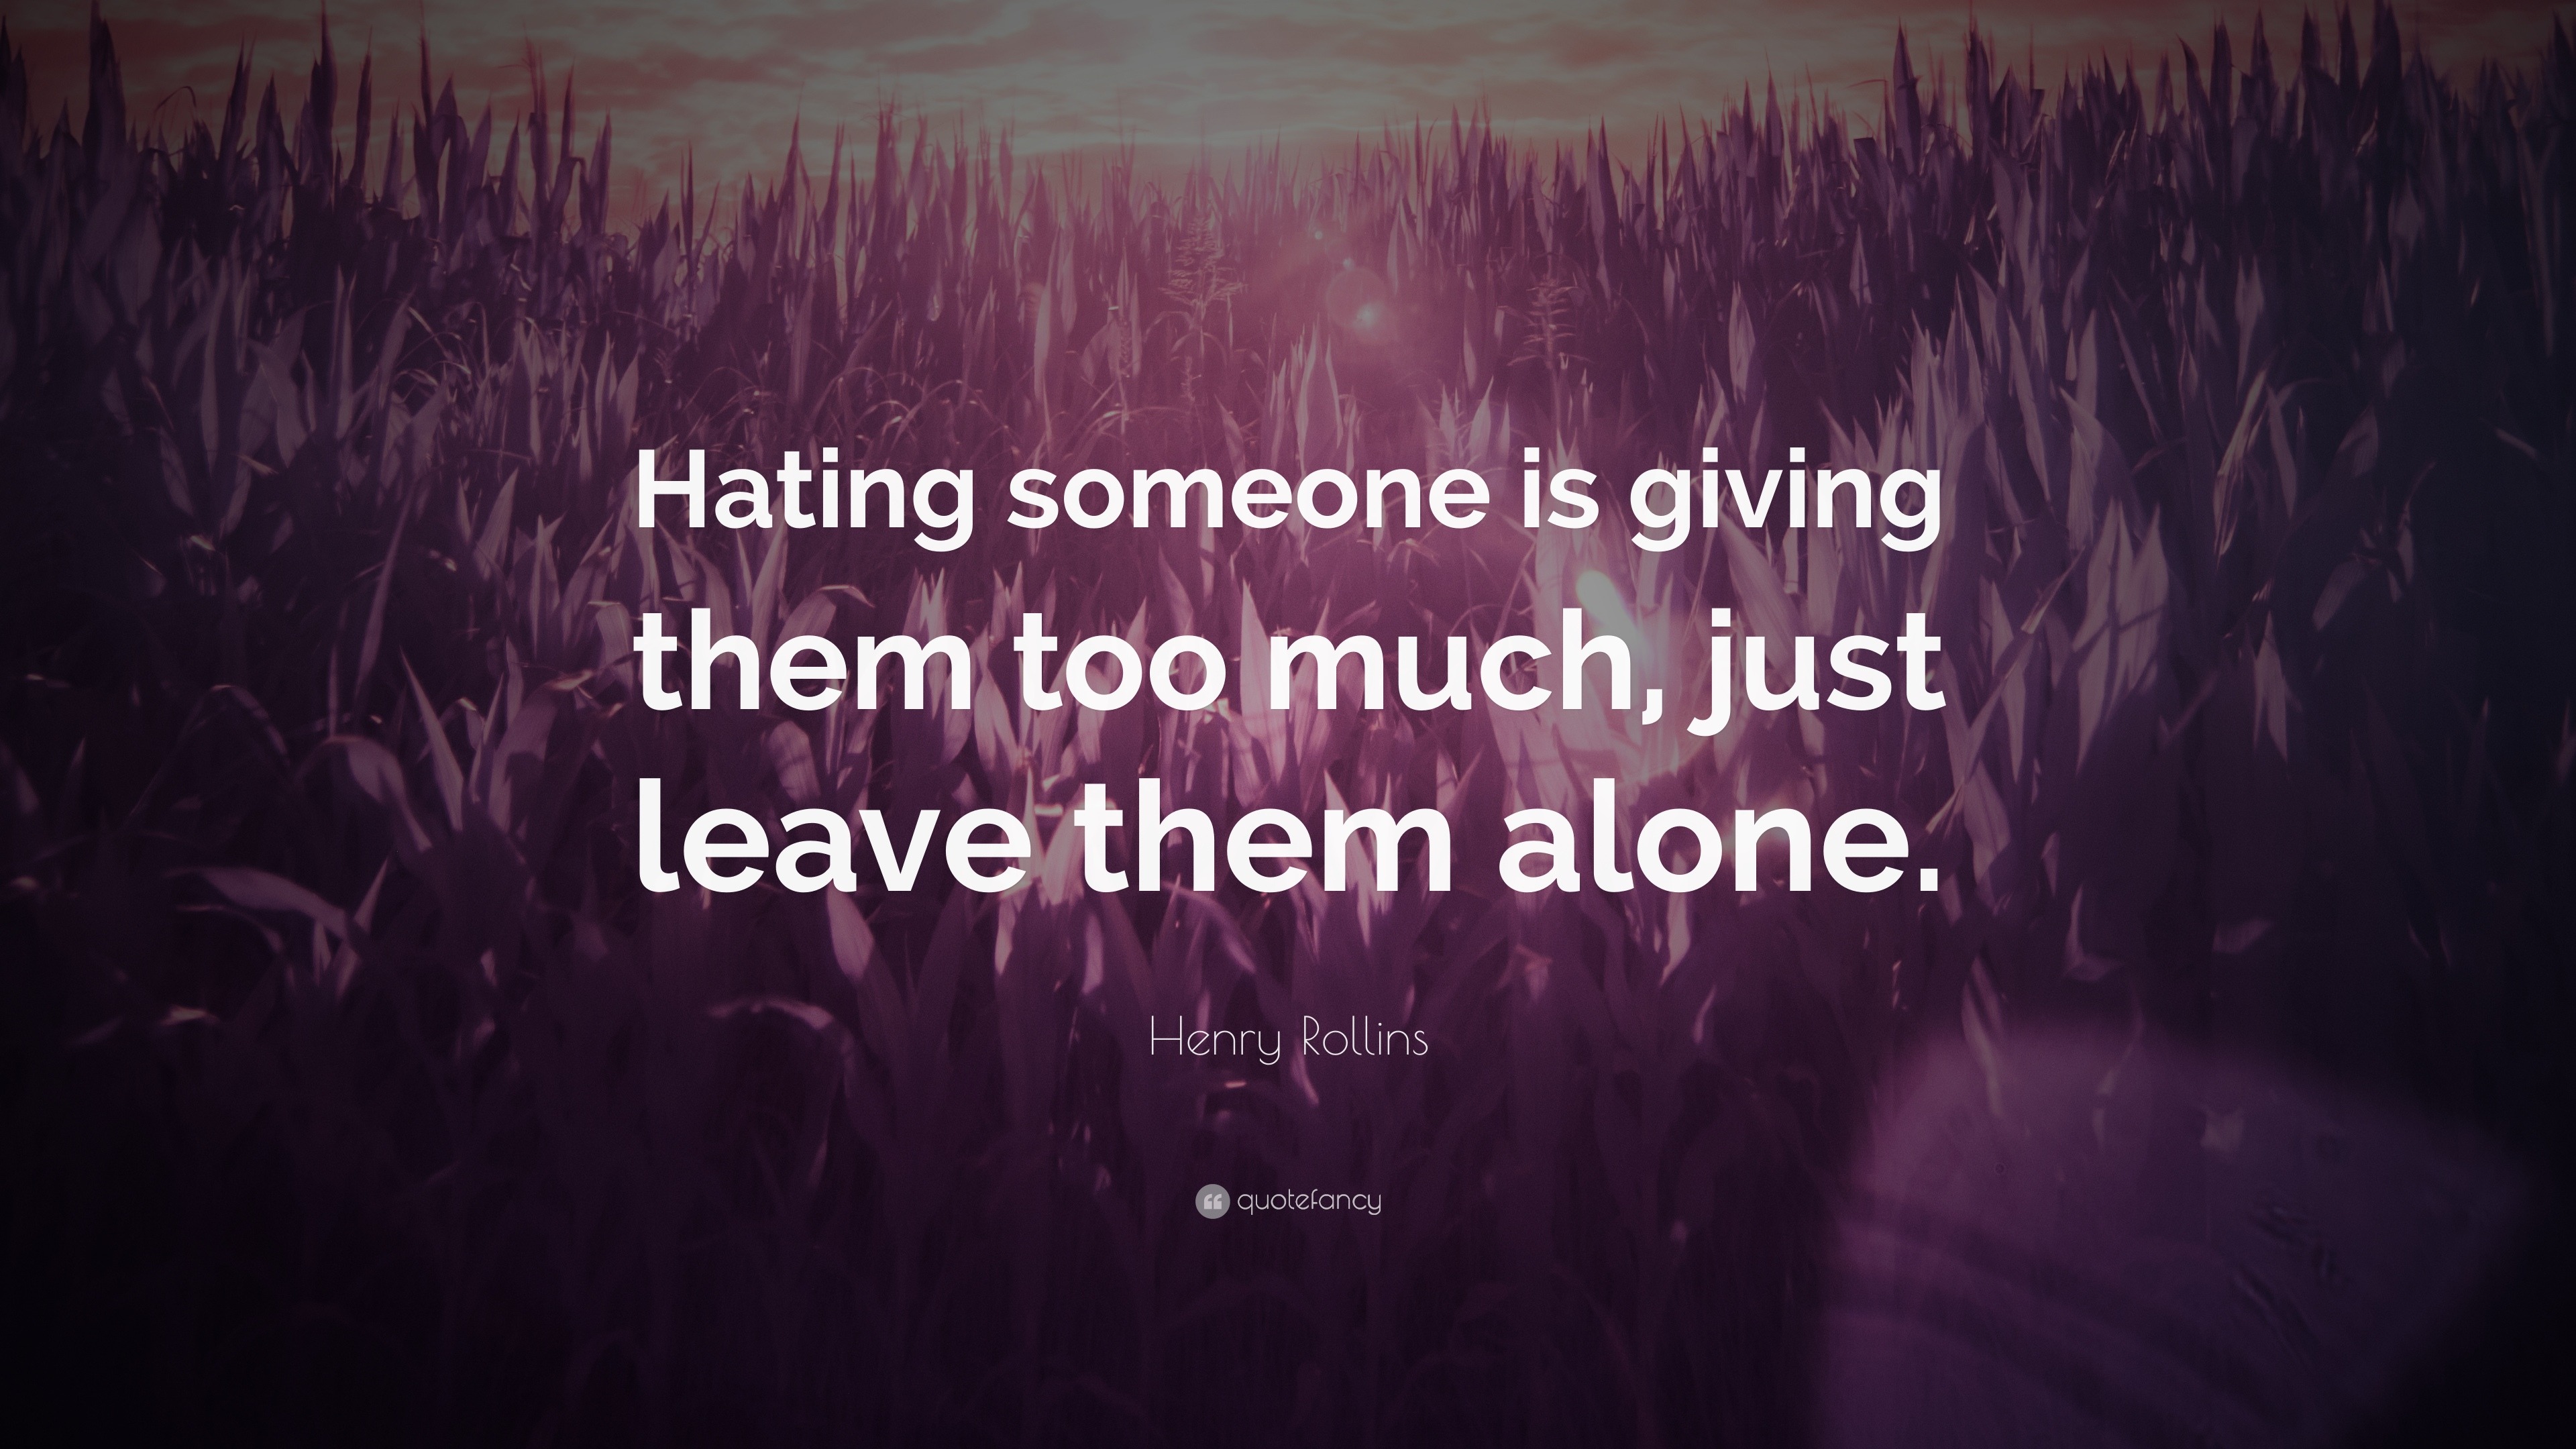 Henry Rollins Quote “Hating someone is giving them too